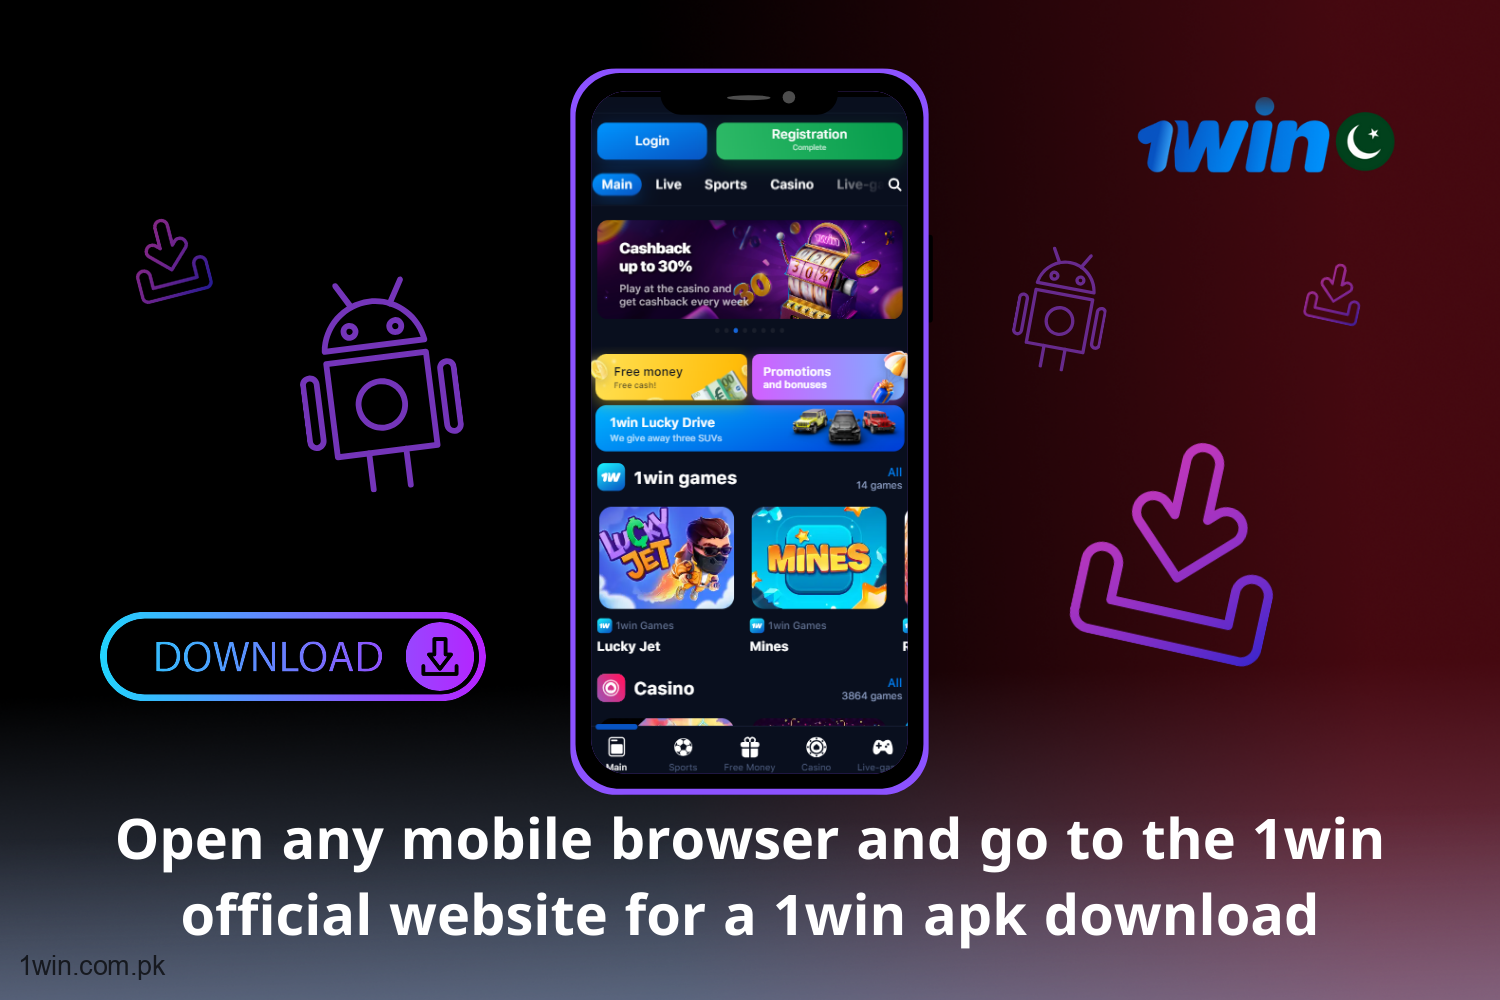 In order to download the supplement on Android, a user from Pakistan should open a mobile browser and go to the official 1win website